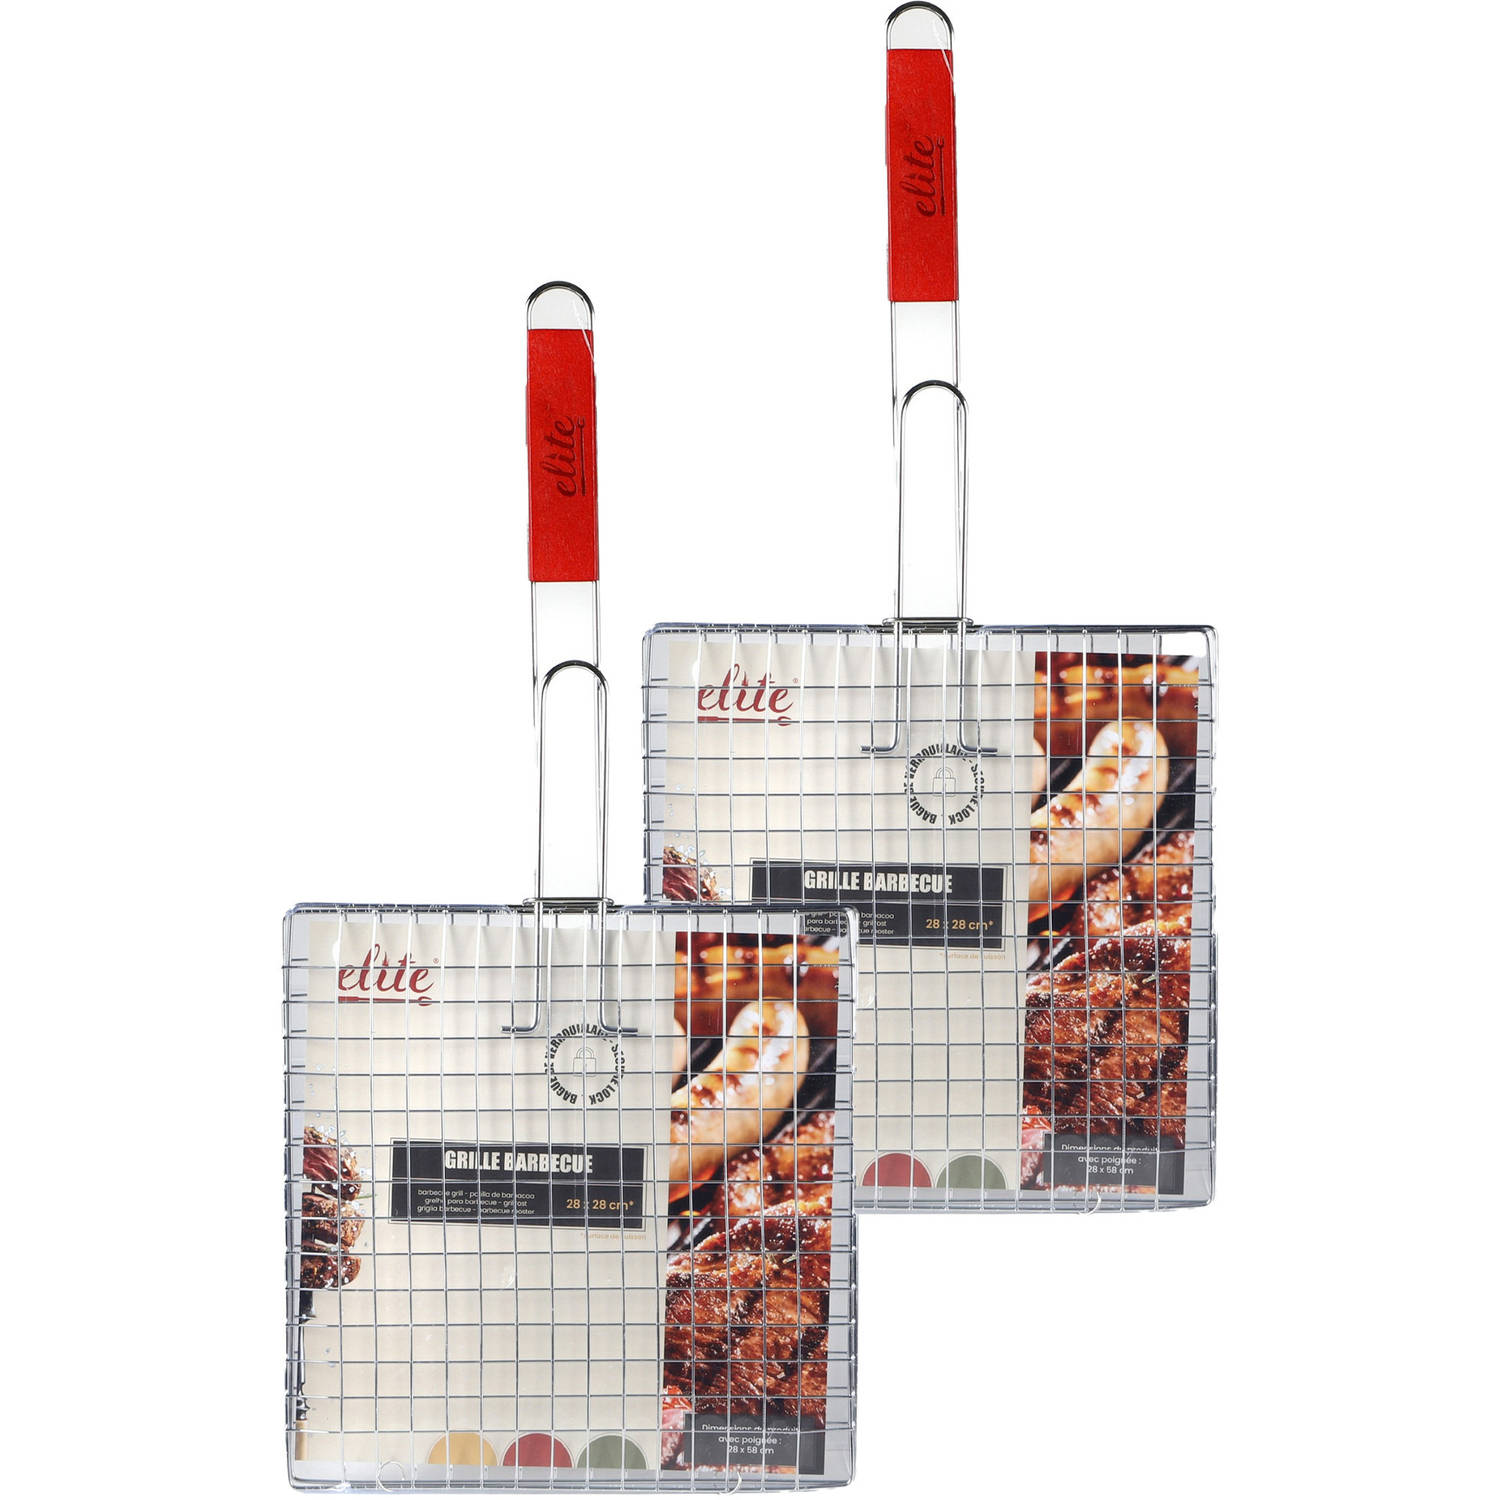 Elite BBQ-barbecue rooster 2x klem grill metaal-hout 28 x 58 x 1 cm barbecueroosters